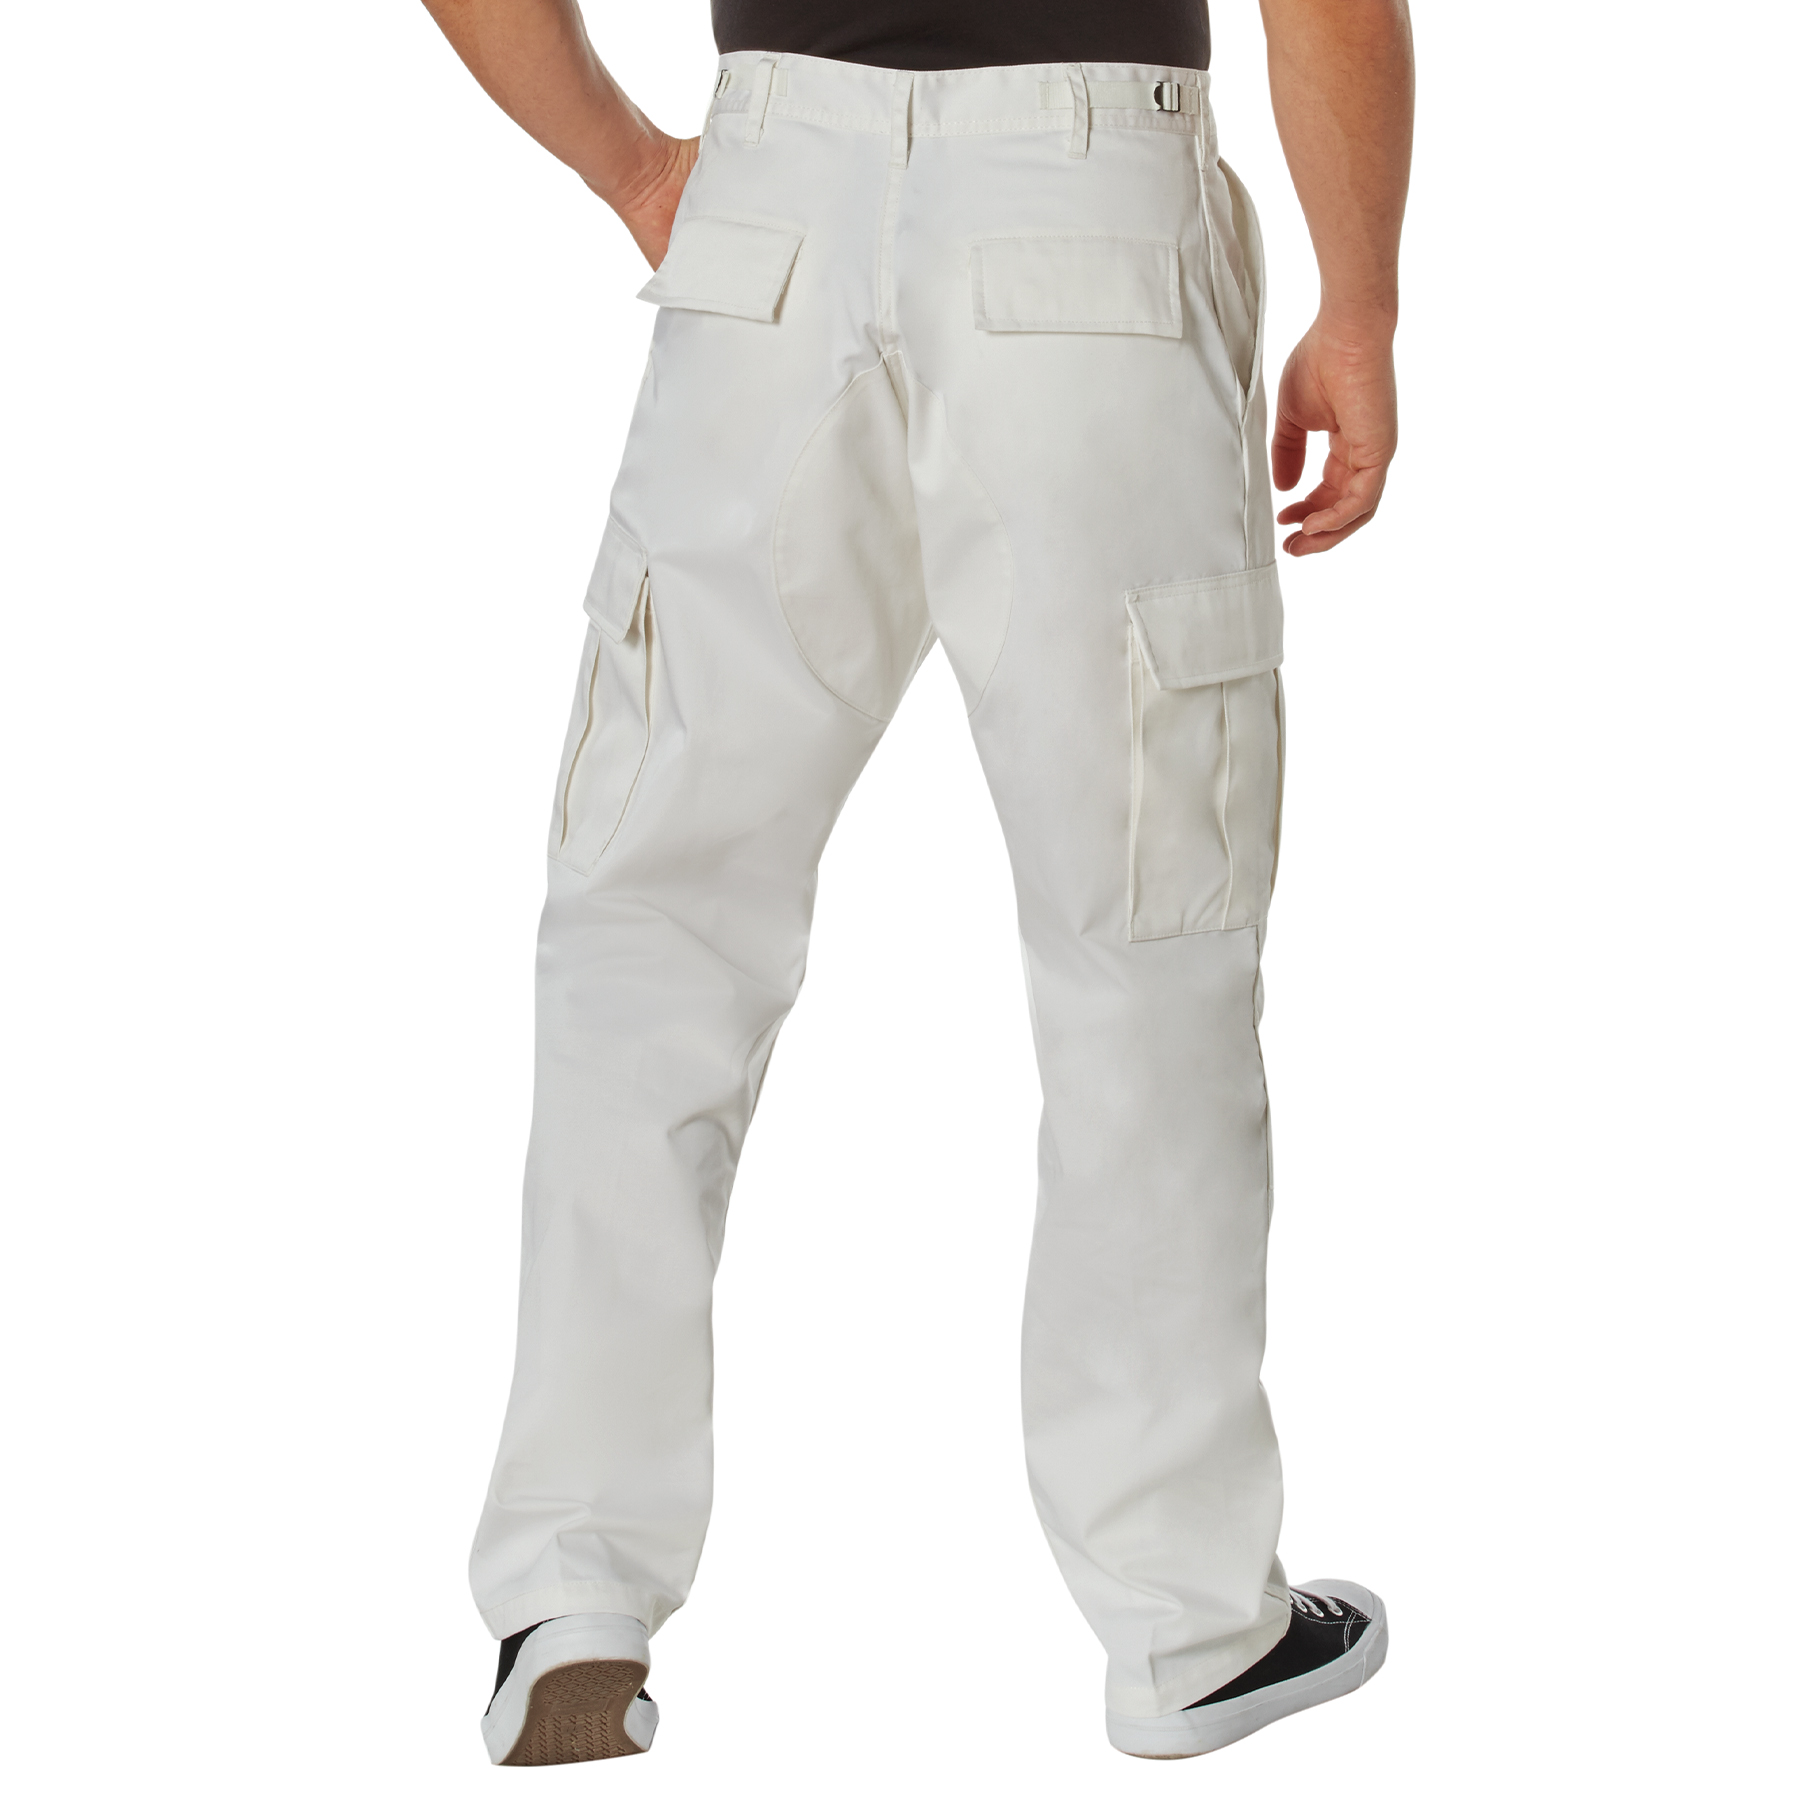 rothco Off White Tactical BDU Cargo Pants